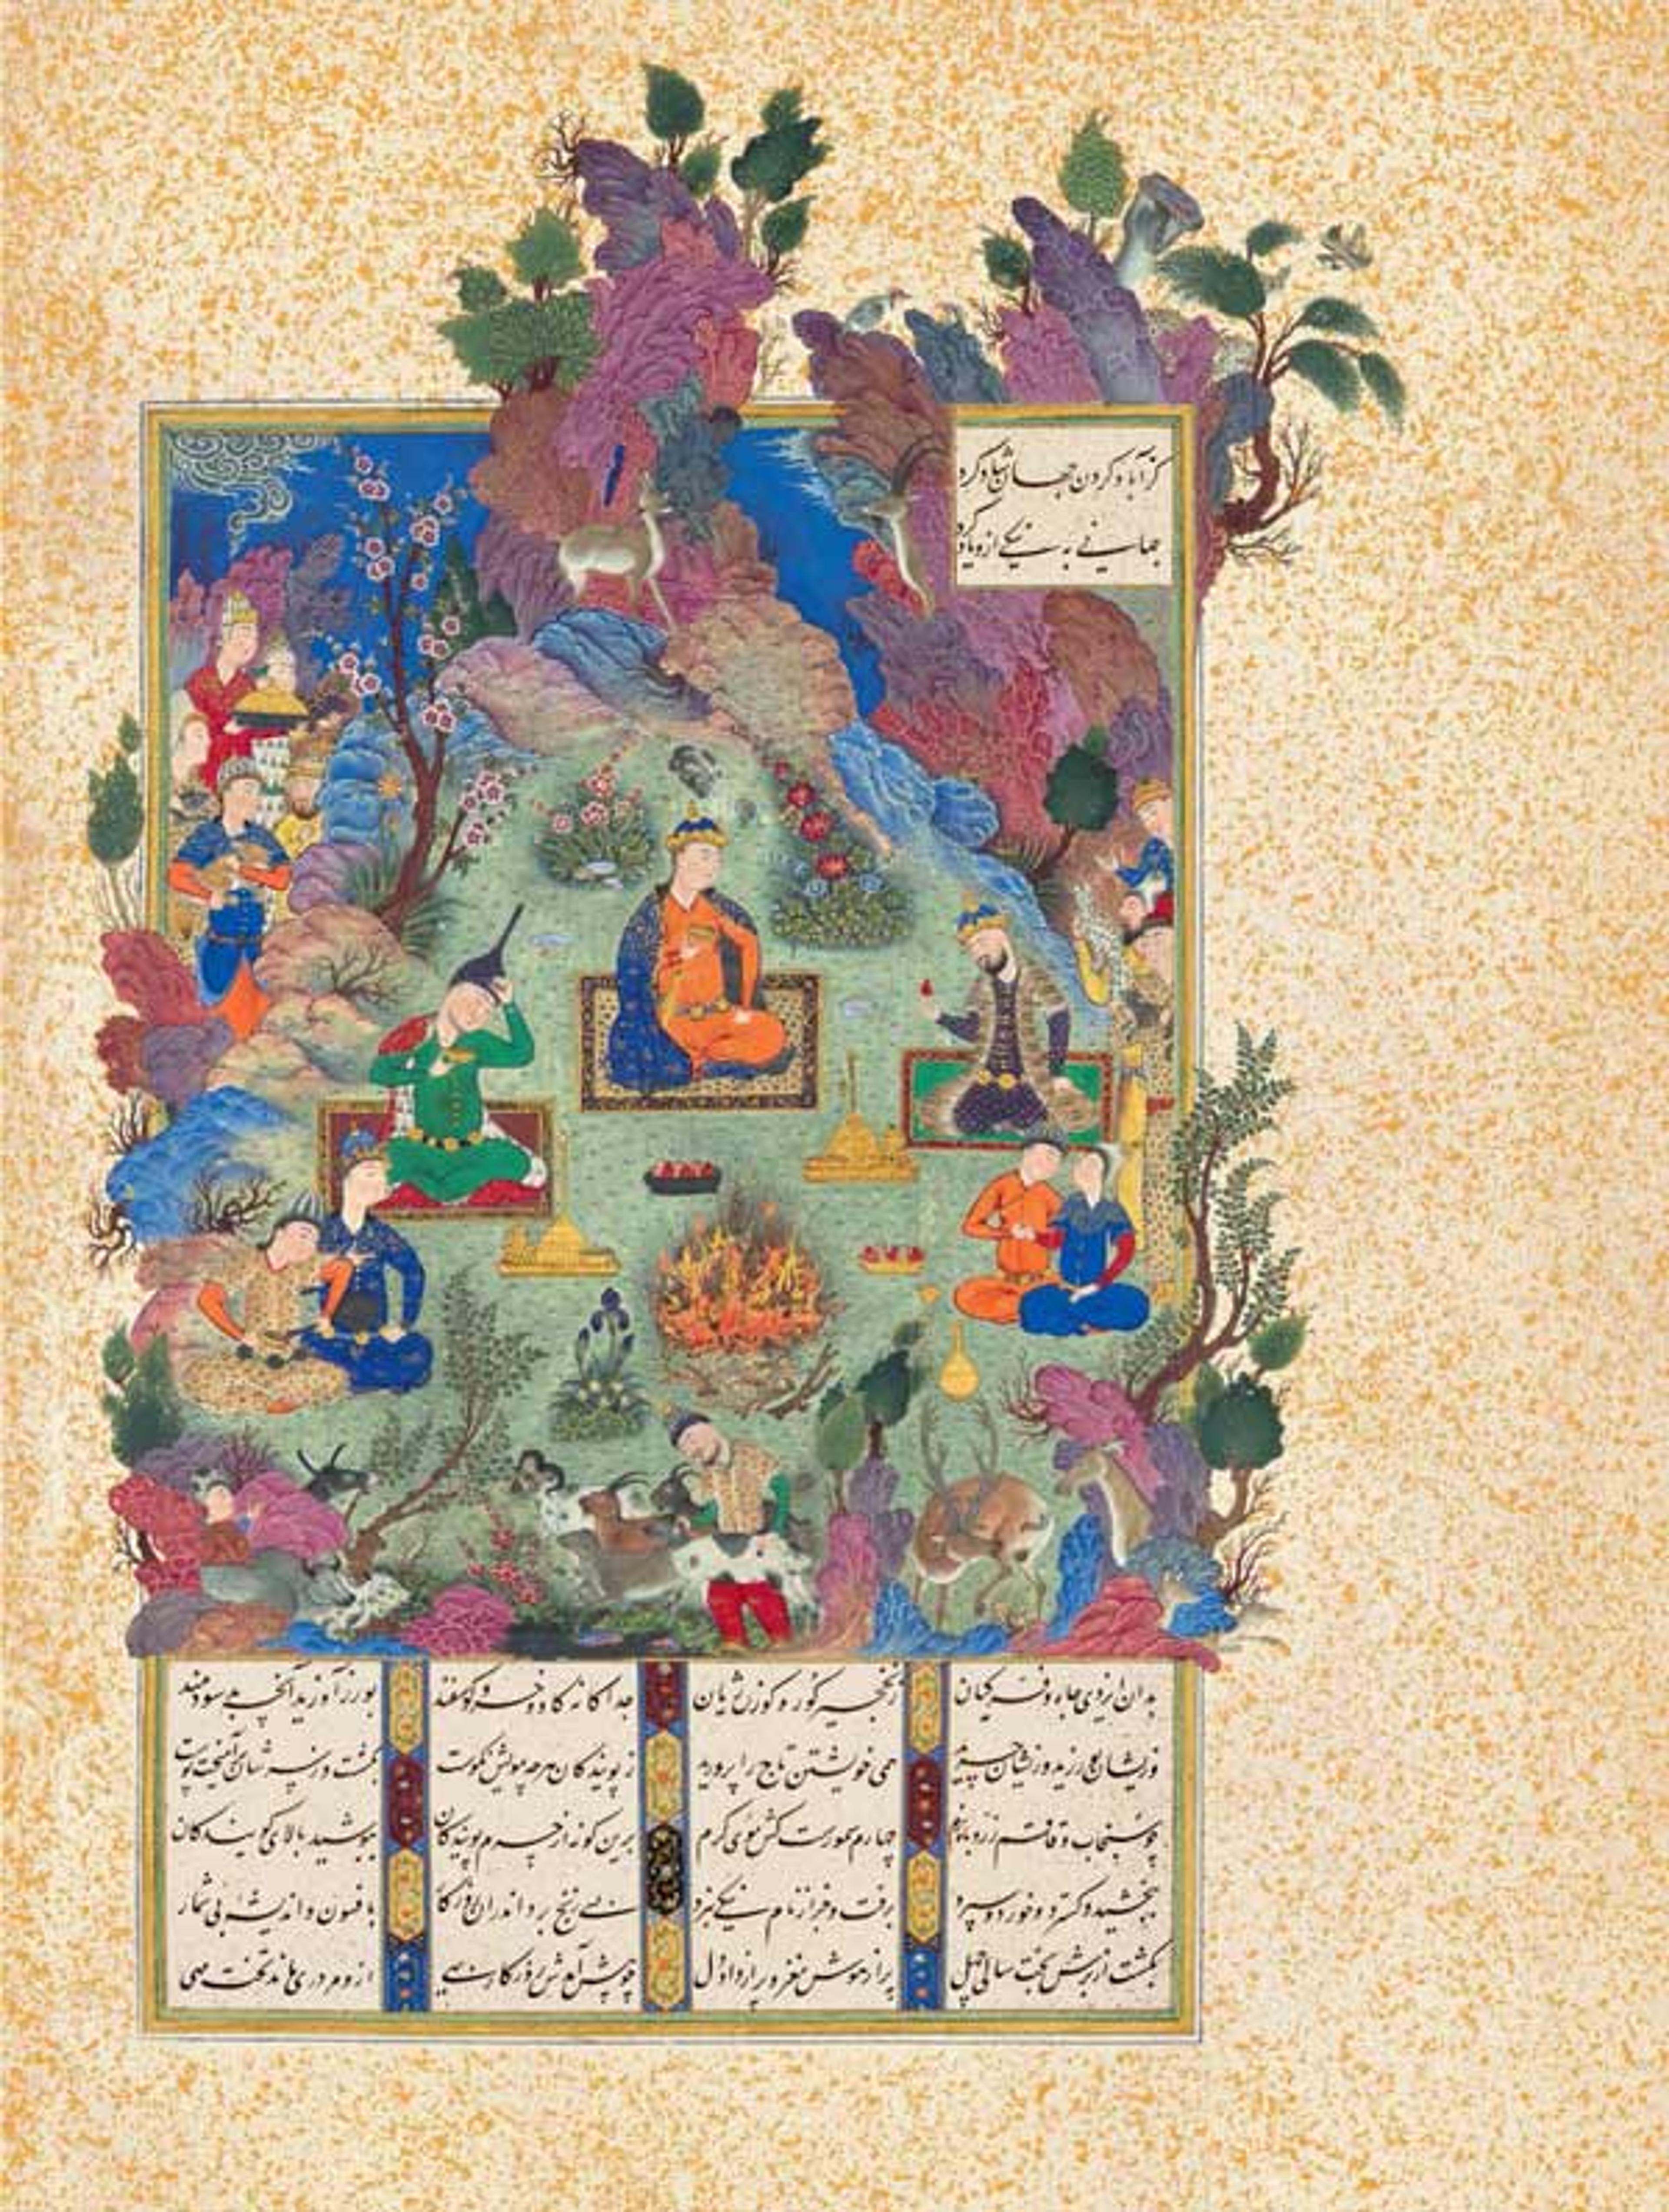 Folio showing the celebration of the feast of Sada. "The Feast of Sada", Folio 22v from the Shahnama (Book of Kings) of Shah Tahmasp, ca 1525. Author Abu'l Qasim Firdausi (935–1020); painting attributed to Sultan Muhammad (active first half 16th century). Iran. Tabriz. Opaque watercolor, ink, silver, and gold on paper; Painting: H. 9 1/2 in. (24.1 cm) W. 9 1/16 in. (23 cm) Page: H. 18 1/2 in. (47 cm) W.12 1/2 in. (31.8 cm) Mat: H. 22 in. (55.9 cm) W. 16 in. (40.6 cm) The Metropolitan Museum of Art, New York, Gift of Arthur A. Houghton Jr., 1970 (1970.301.2)